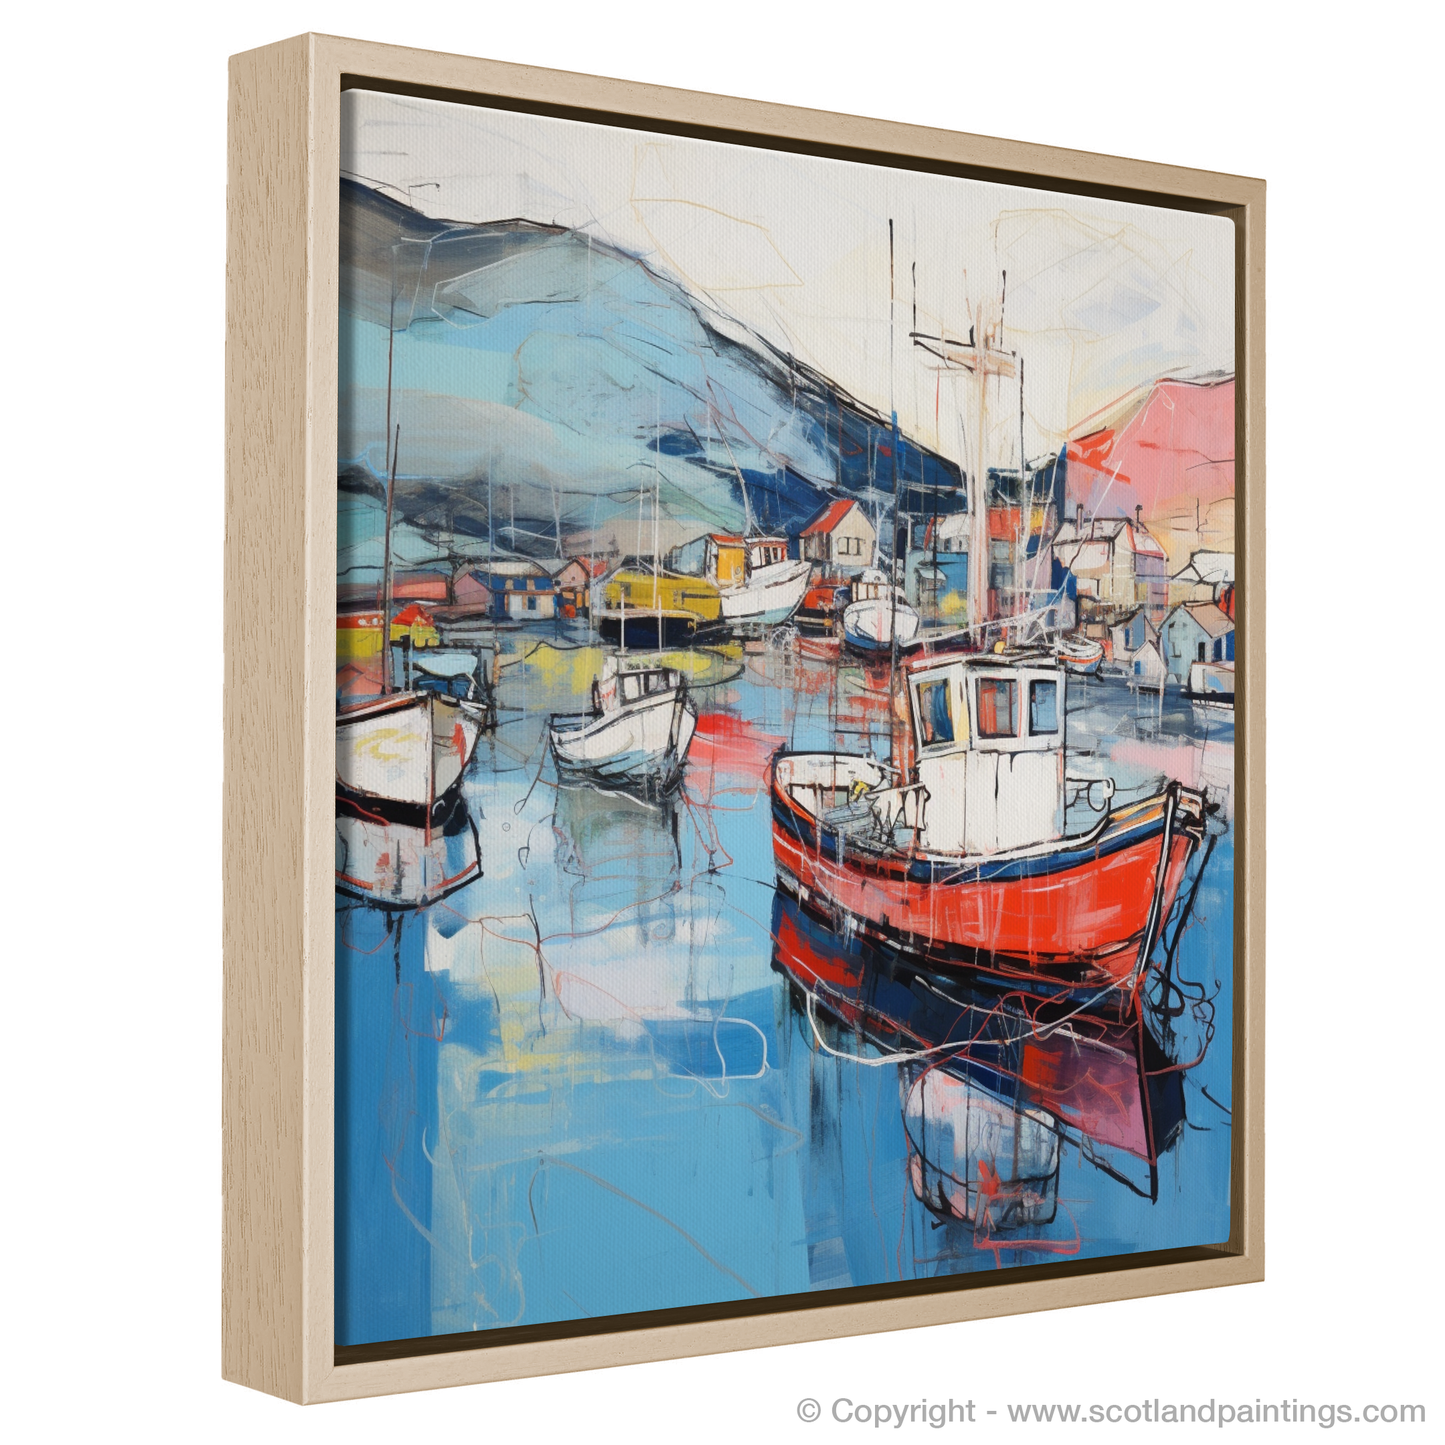 Painting and Art Print of Ullapool Harbour entitled "Contemporary Ullapool Harbour: A Modern Artistic Reflection".